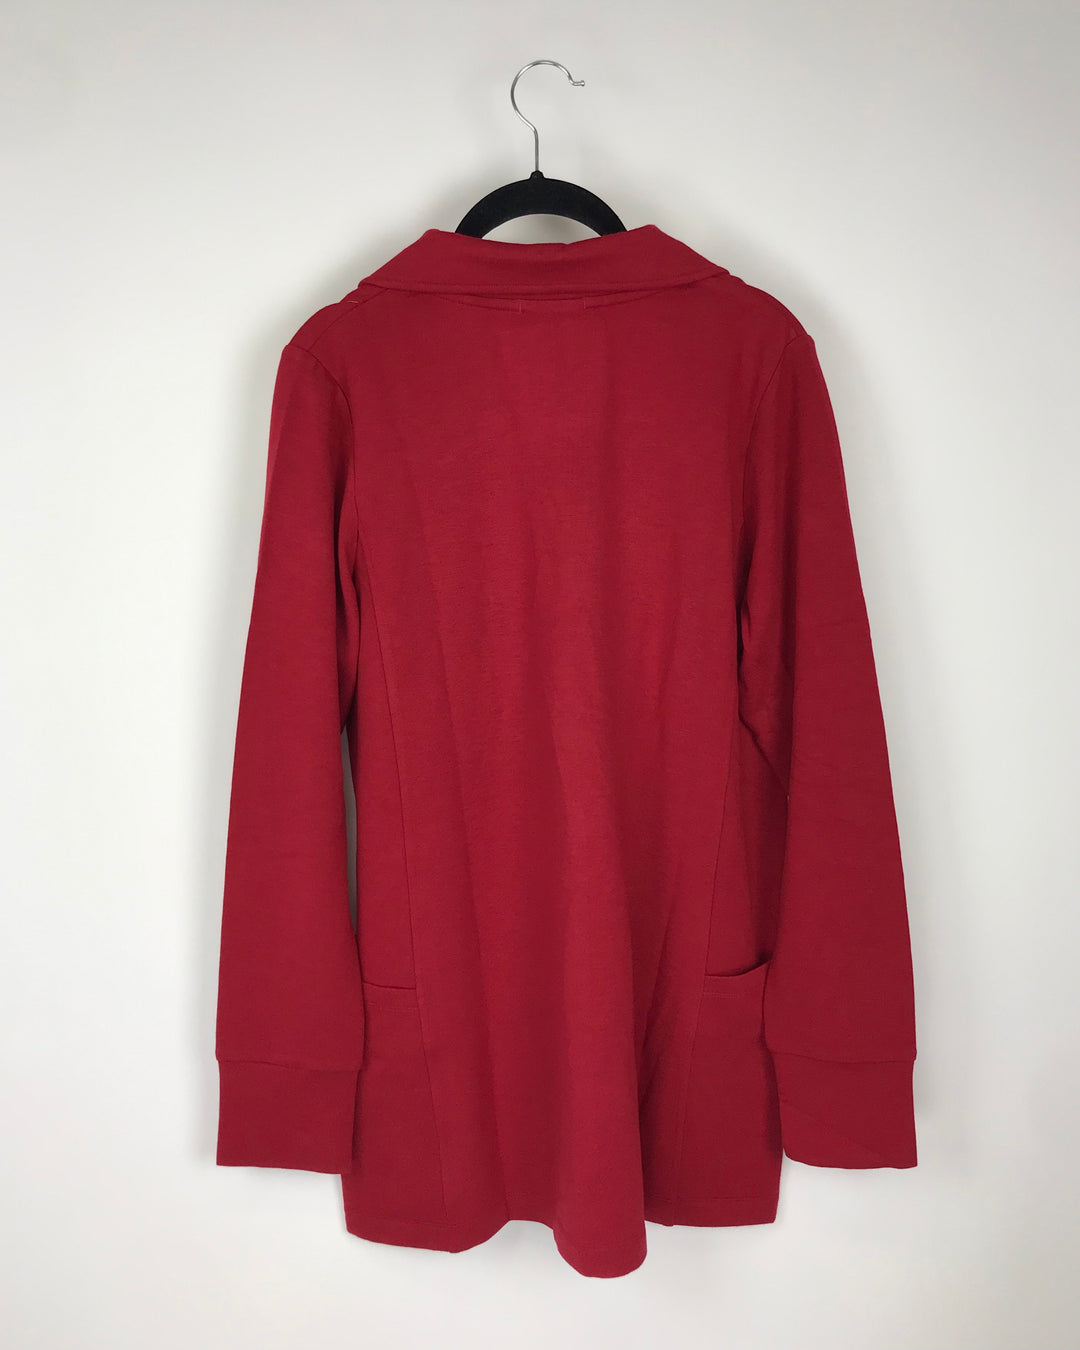 Red Cardigan - Size 2/4 and 6/8